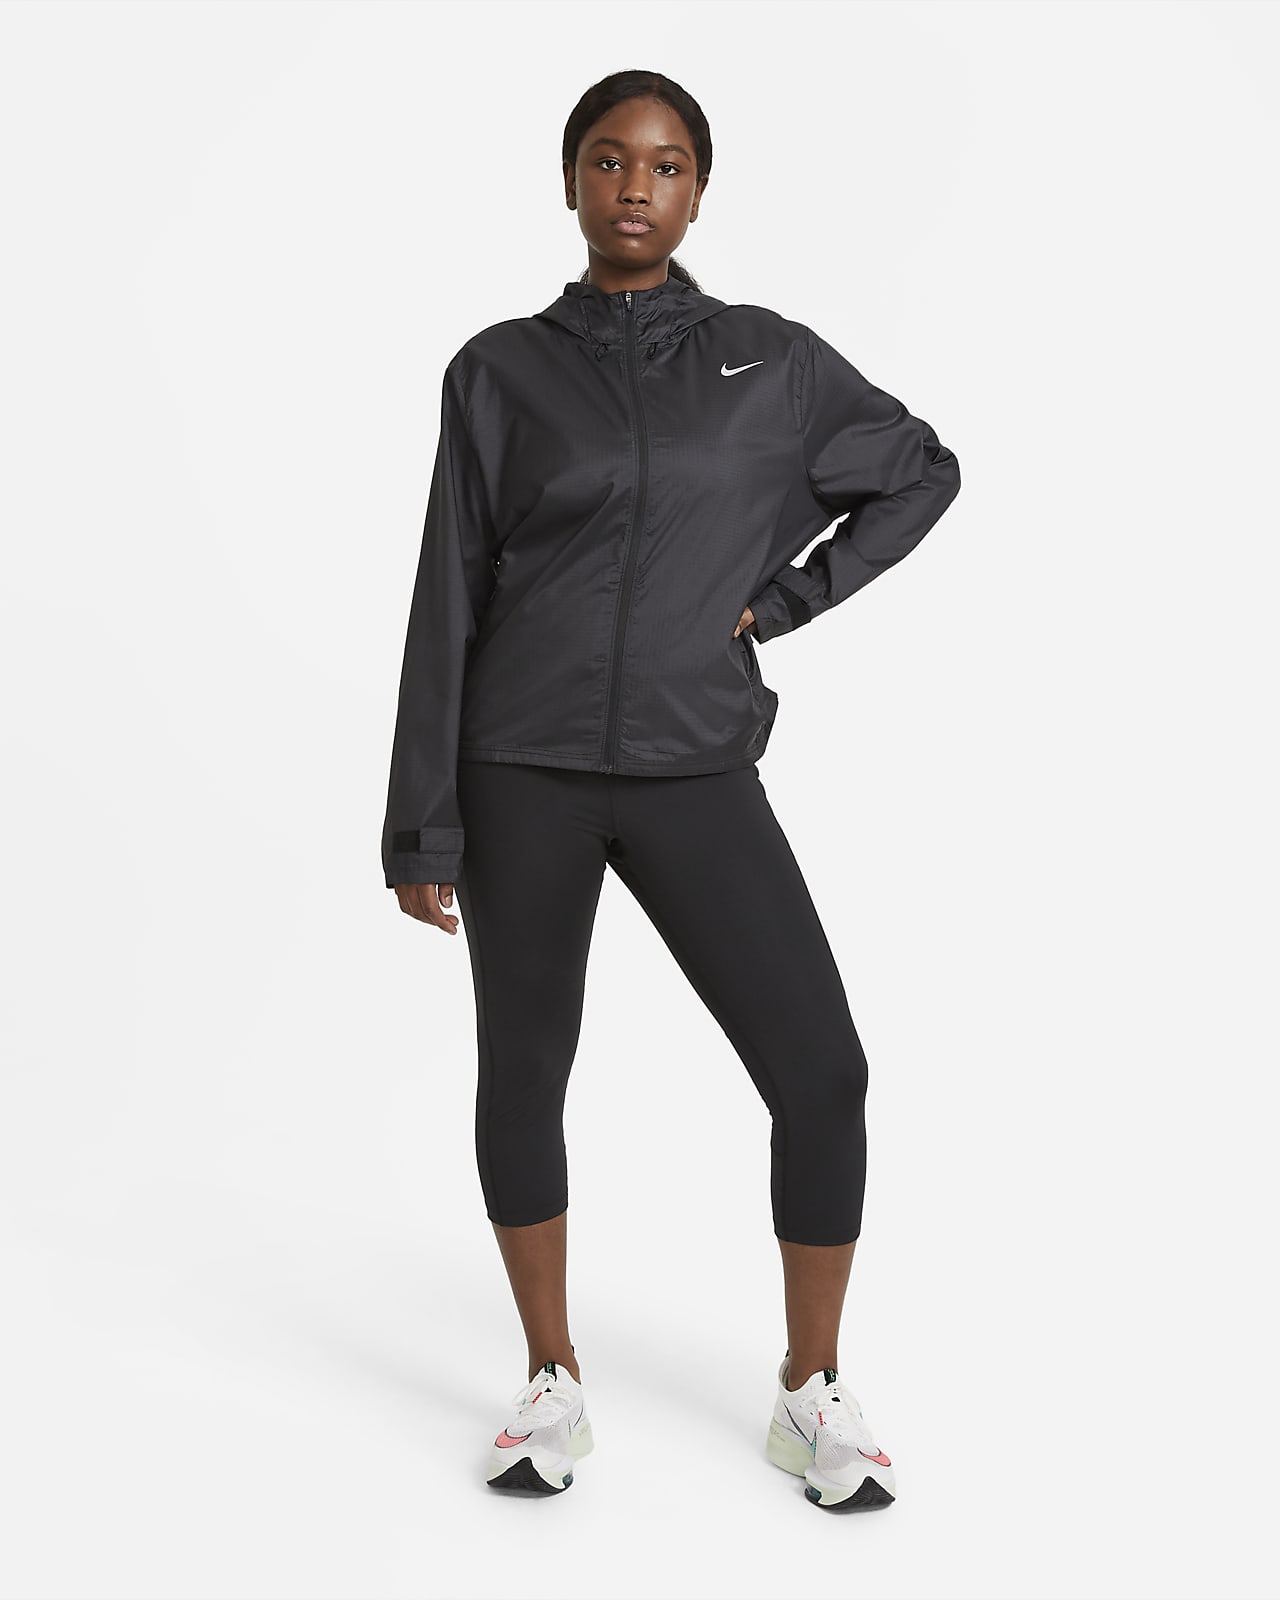 The best leggings for running by Nike. Nike IL